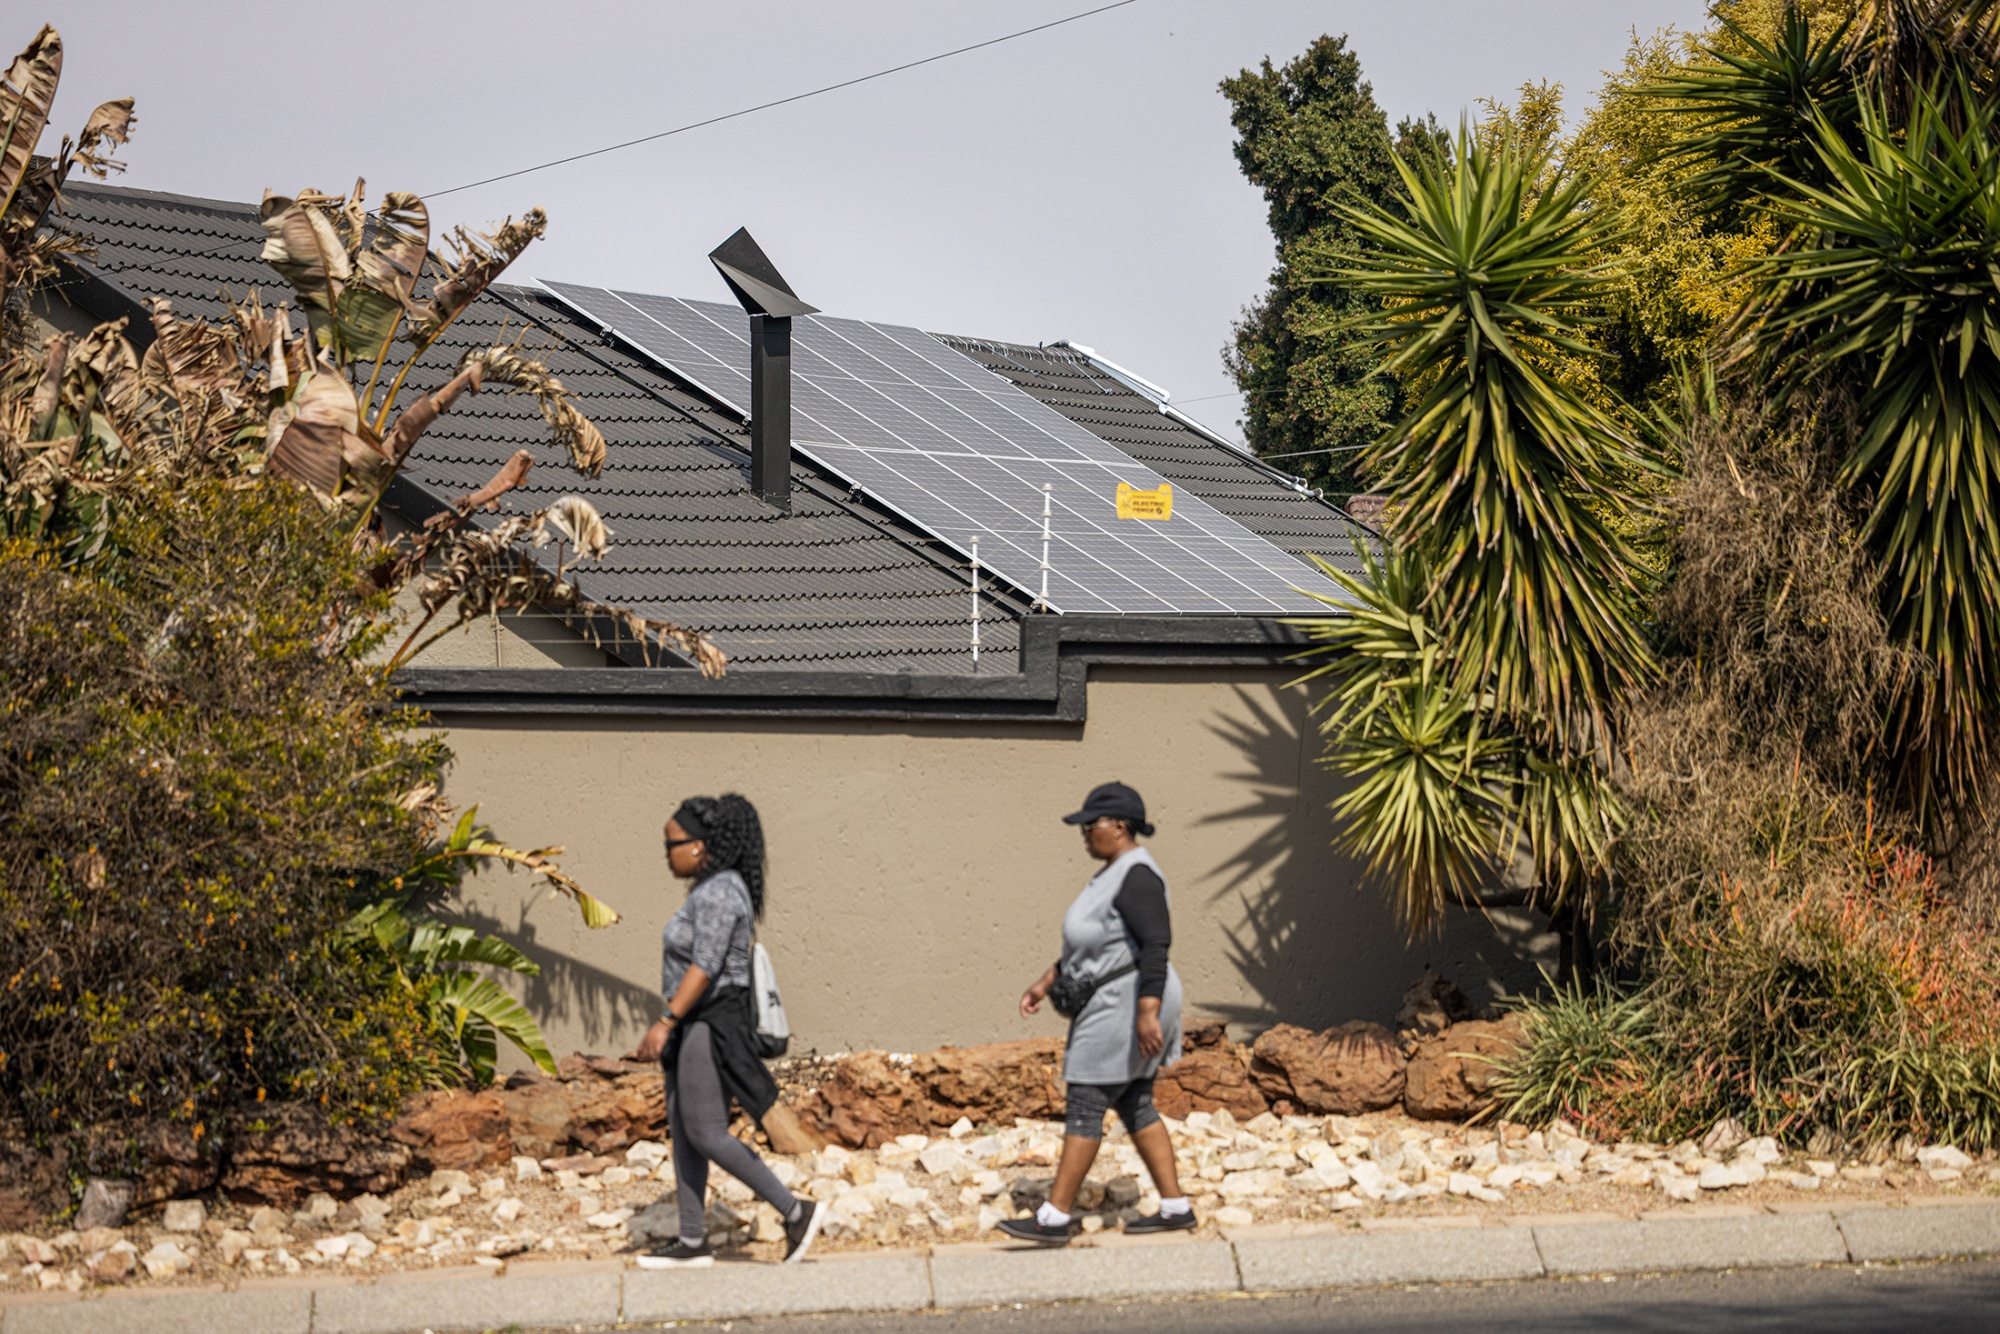 South Africans Are Going Green to Escape Incessant Power Cuts - Bloomberg